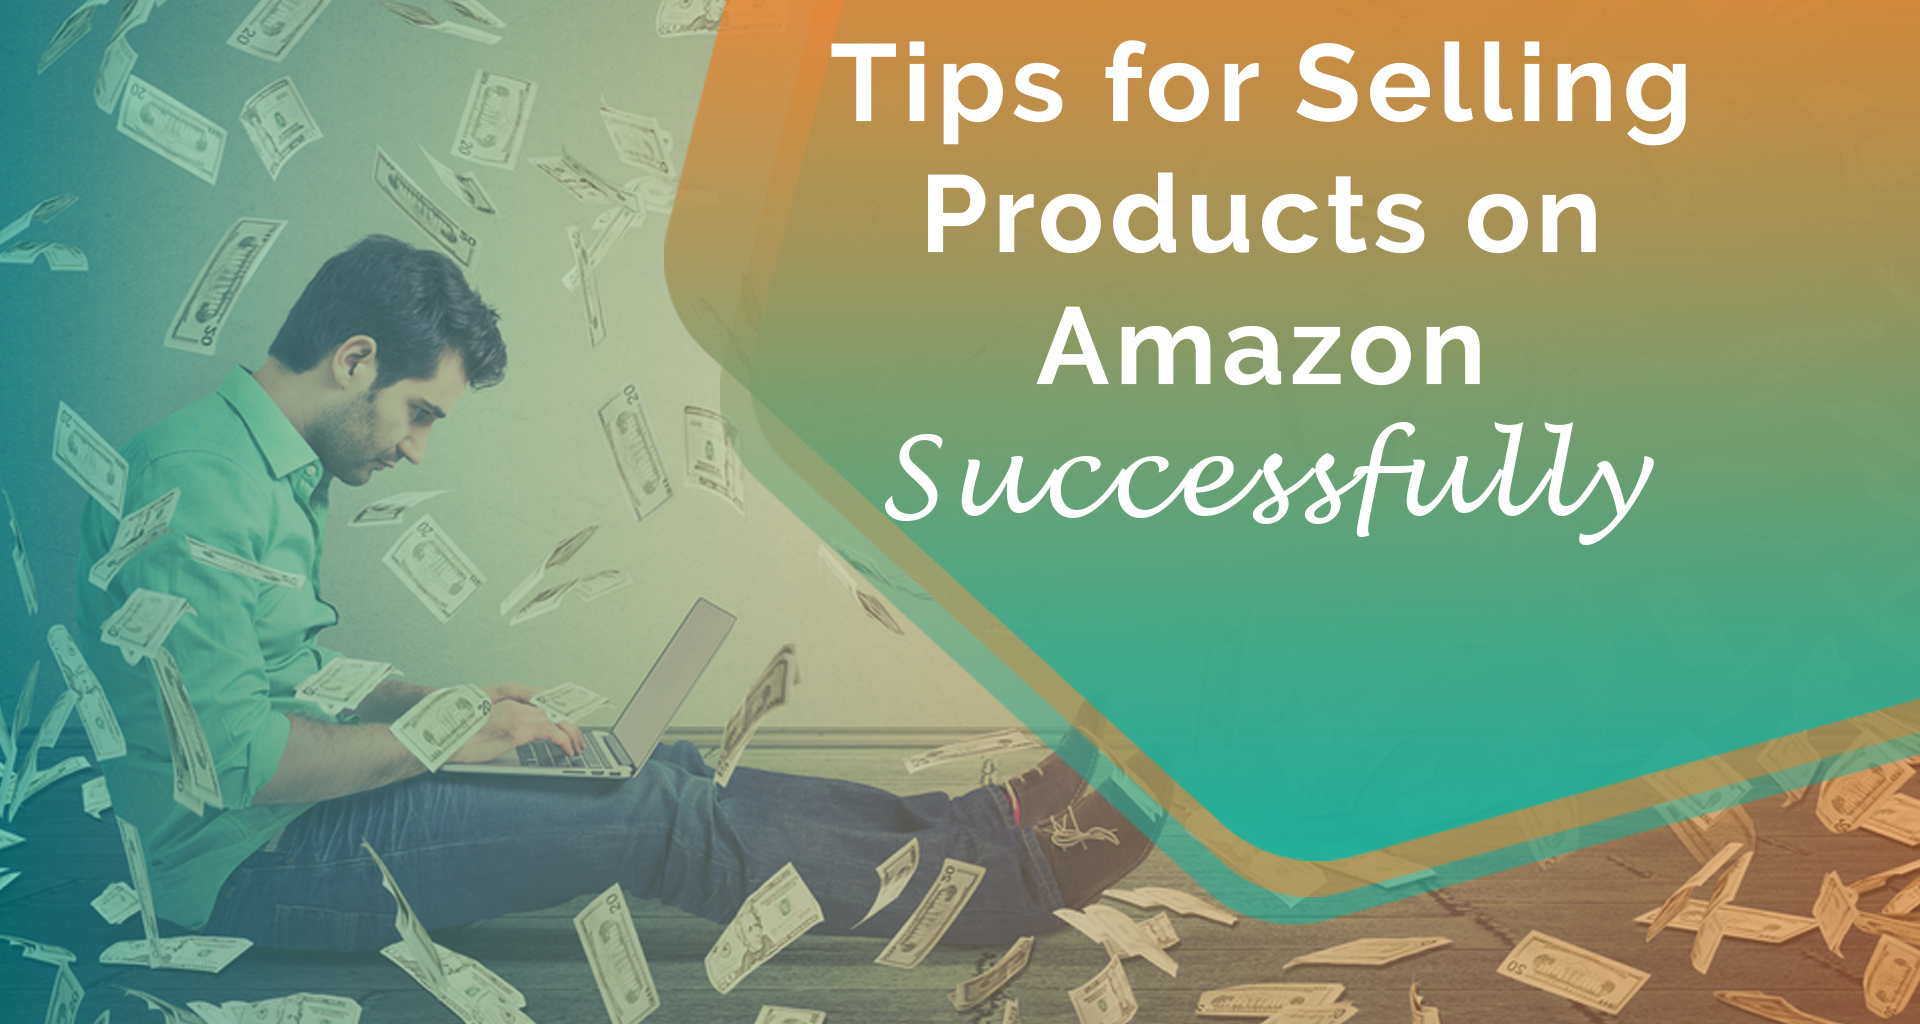 Tips for Selling Products on Amazon Successfully!